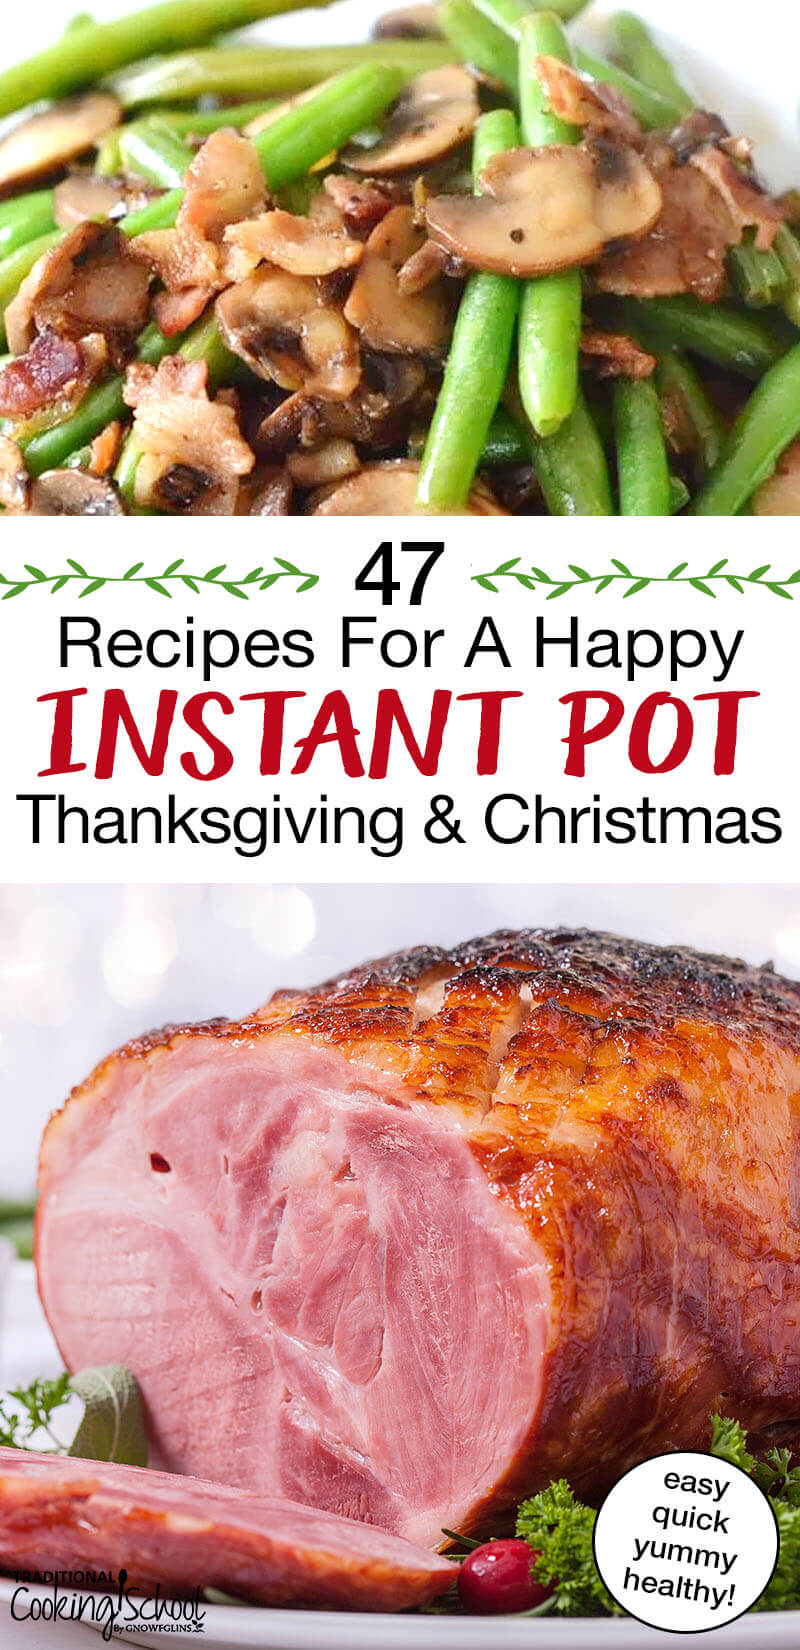 Recipes For A Happy Instant Pot Thanksgiving & Christmas {pressure cooker, too!} | Cut down on cooking time (and even dishes) this year with these Instant Pot or pressure cooker holiday recipes for Thanksgiving and Christmas. Turkey, lamb roast, stuffing, gravy, sweet potato casserole, green beans, and even naturally sweetened cranberry sauce... it's all here! | TraditionalCookingSchool.com